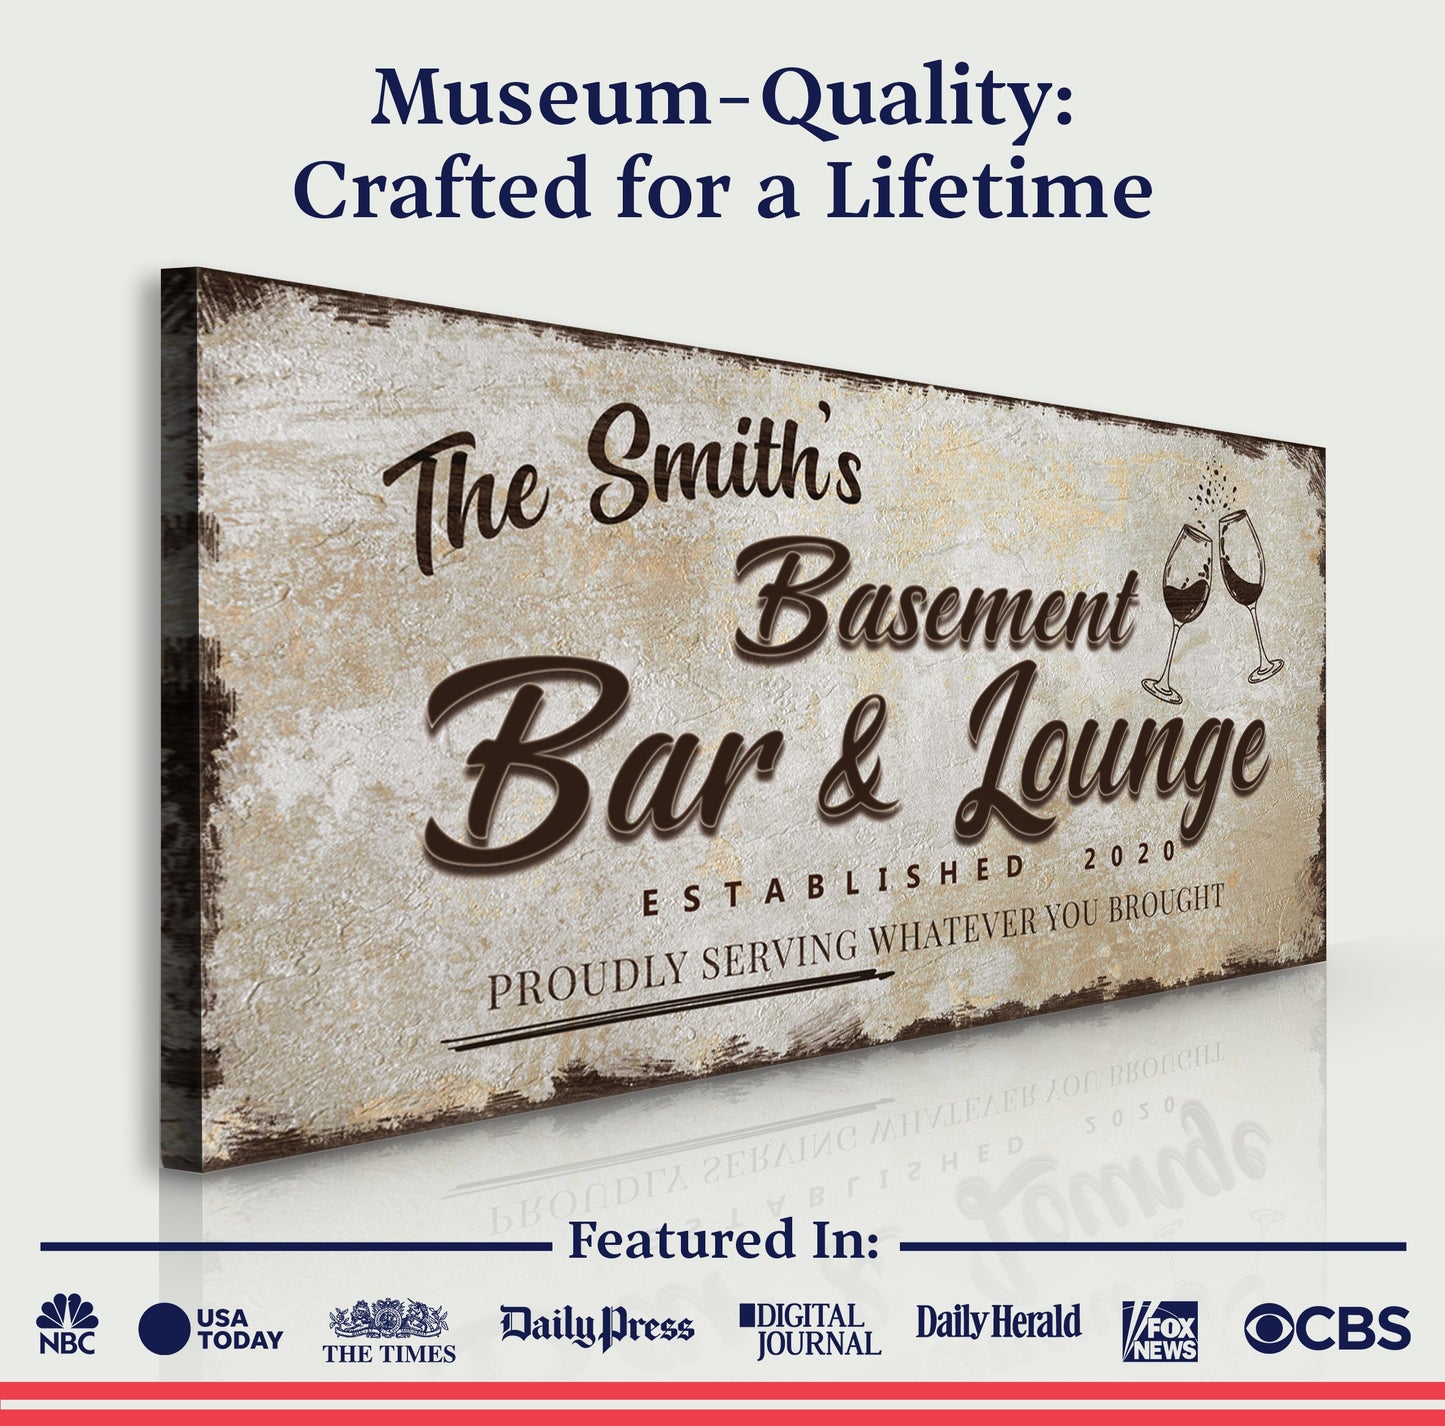 Personalized Basement Bar Sign: Custom Bar Signs for Home Bar – Perfect Man Cave Wall Decor